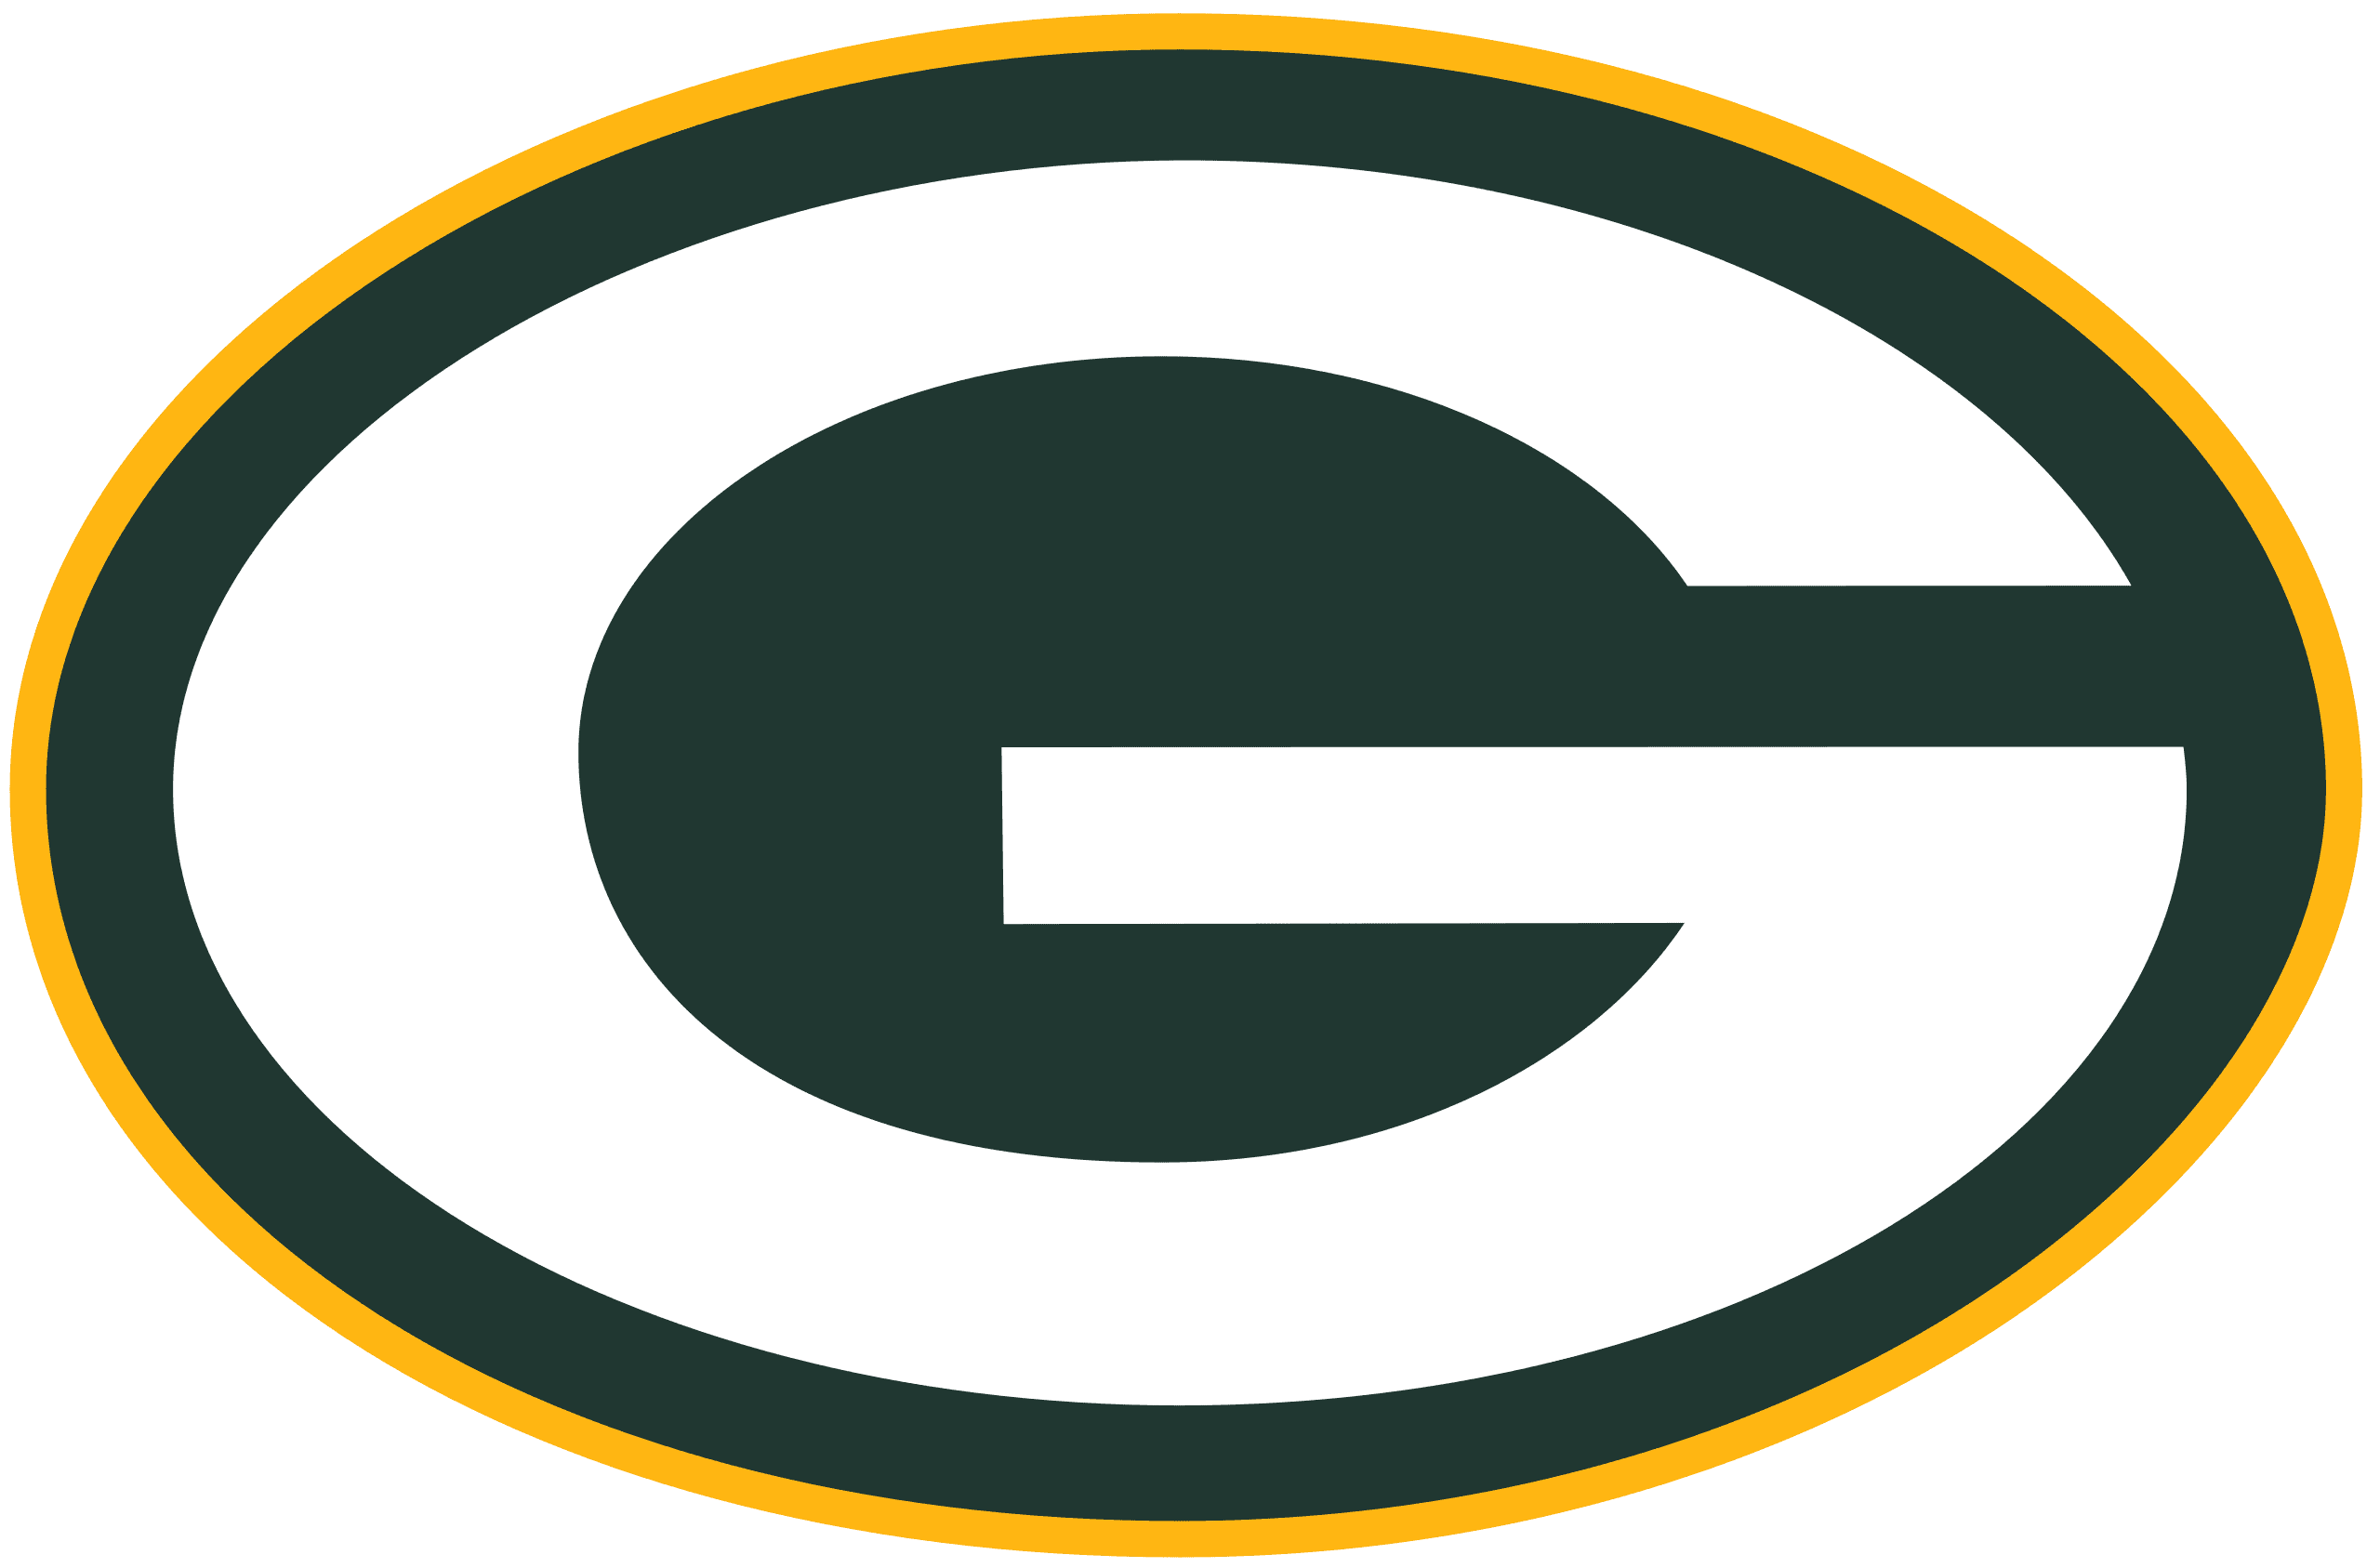 Green Bay Packers set dates for training camp